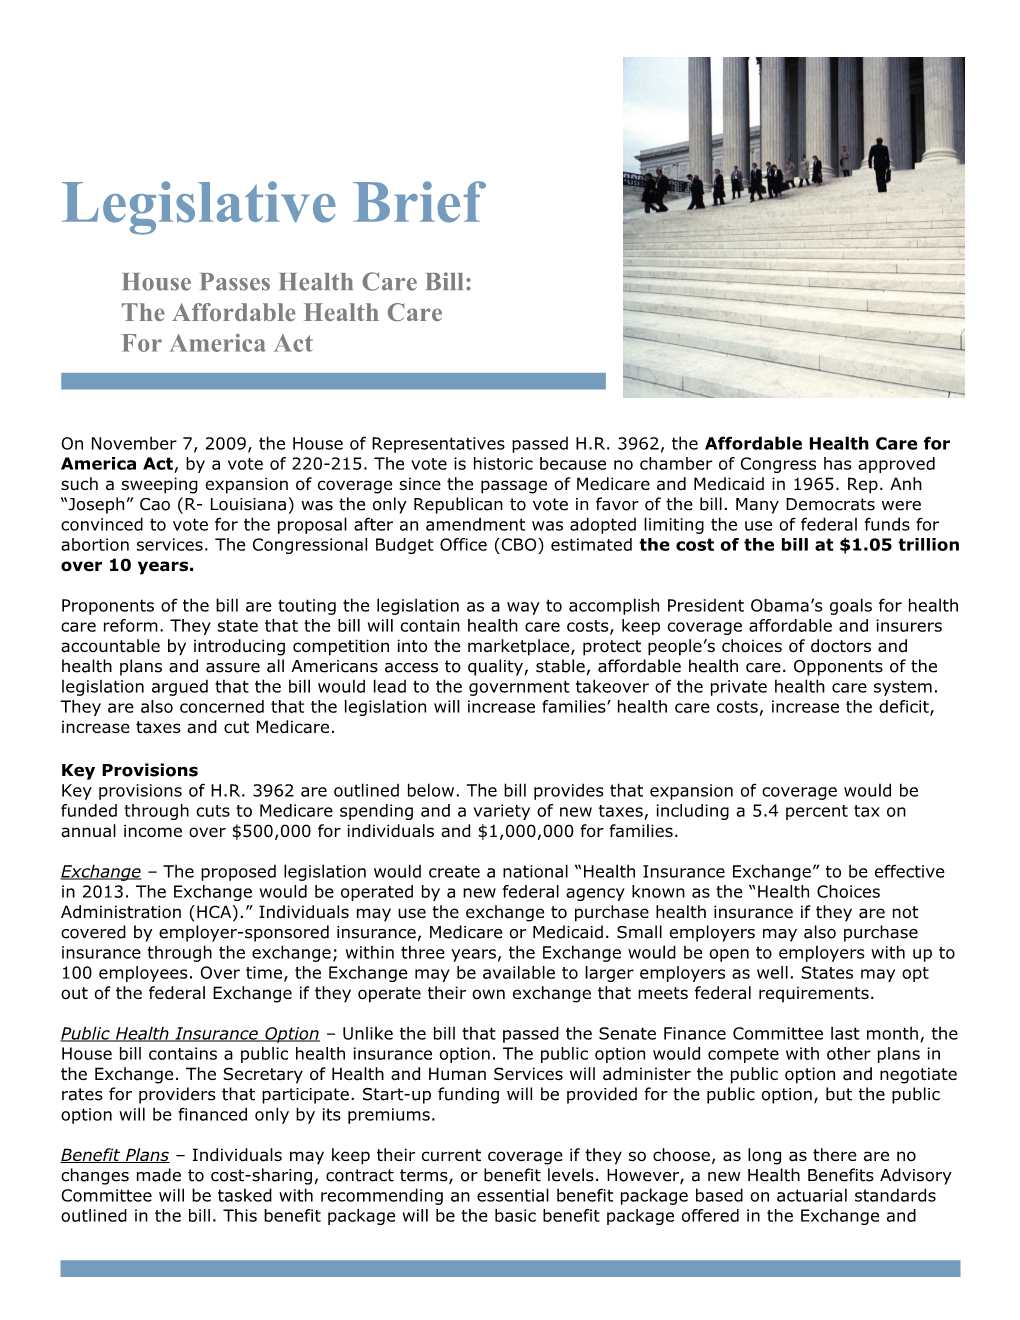 Legis Brief Affordable Health Care for America Act (00015710)